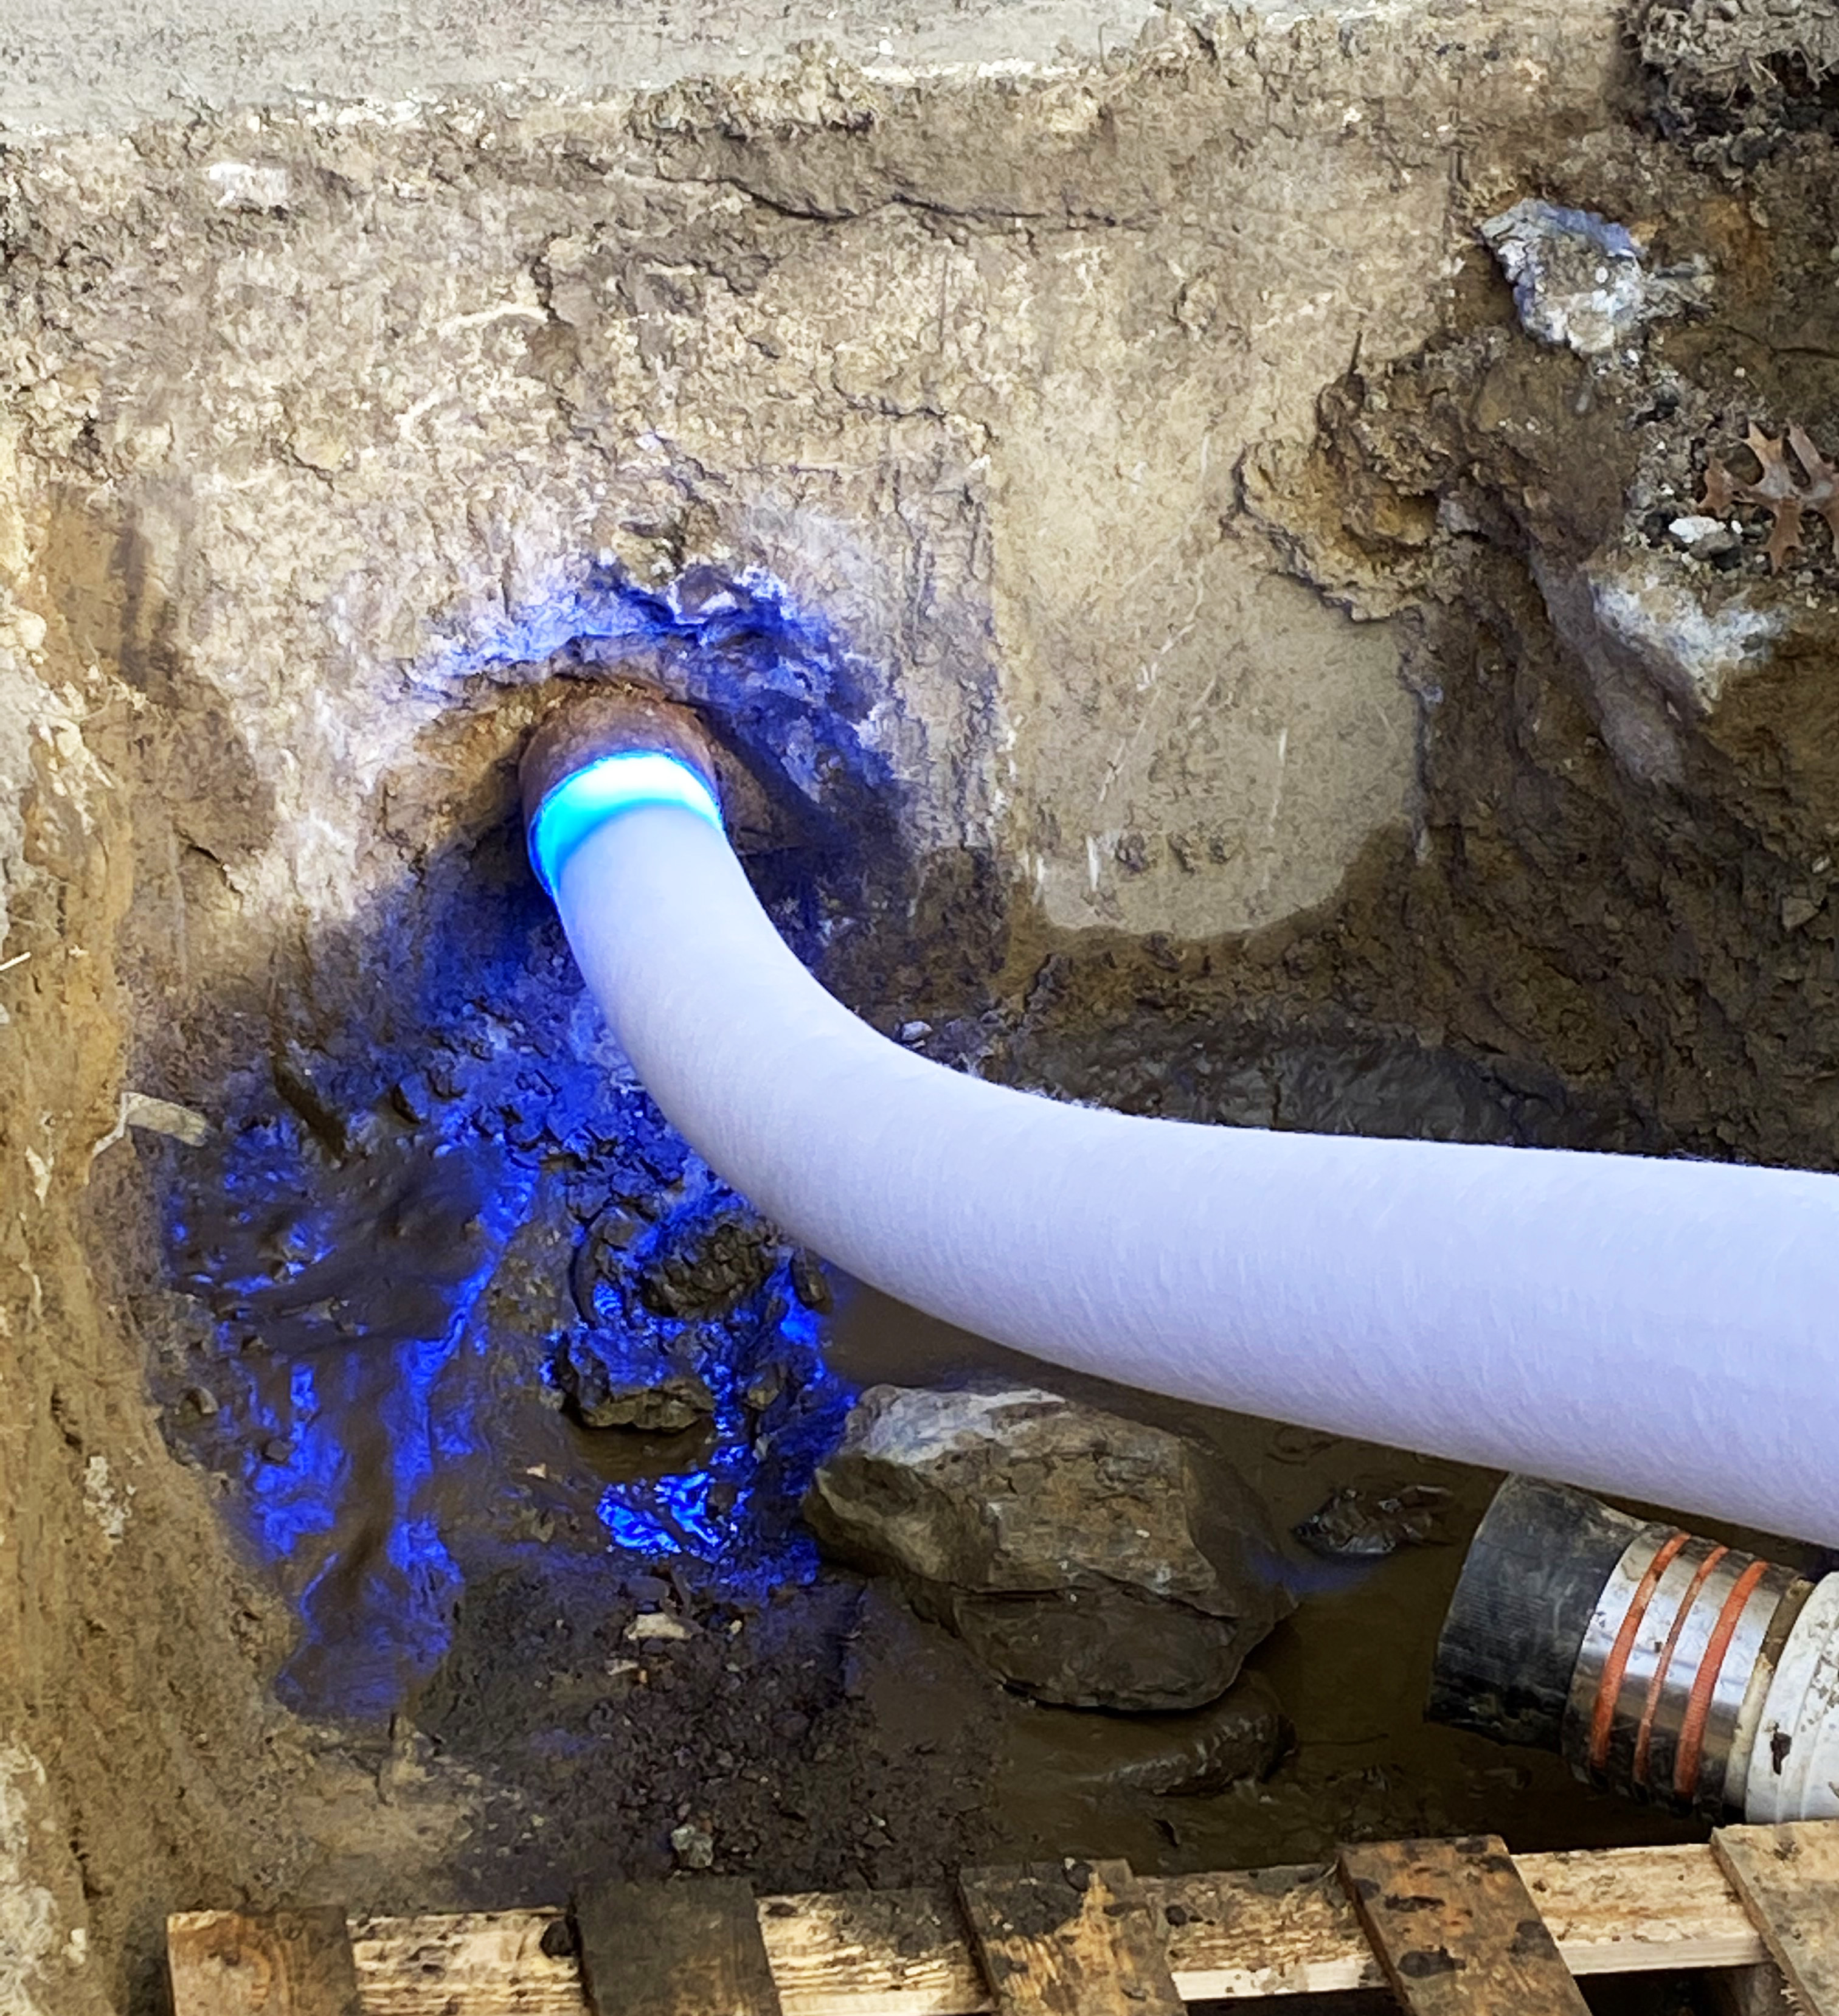 CIPP Installation in Pipe with Infiltration